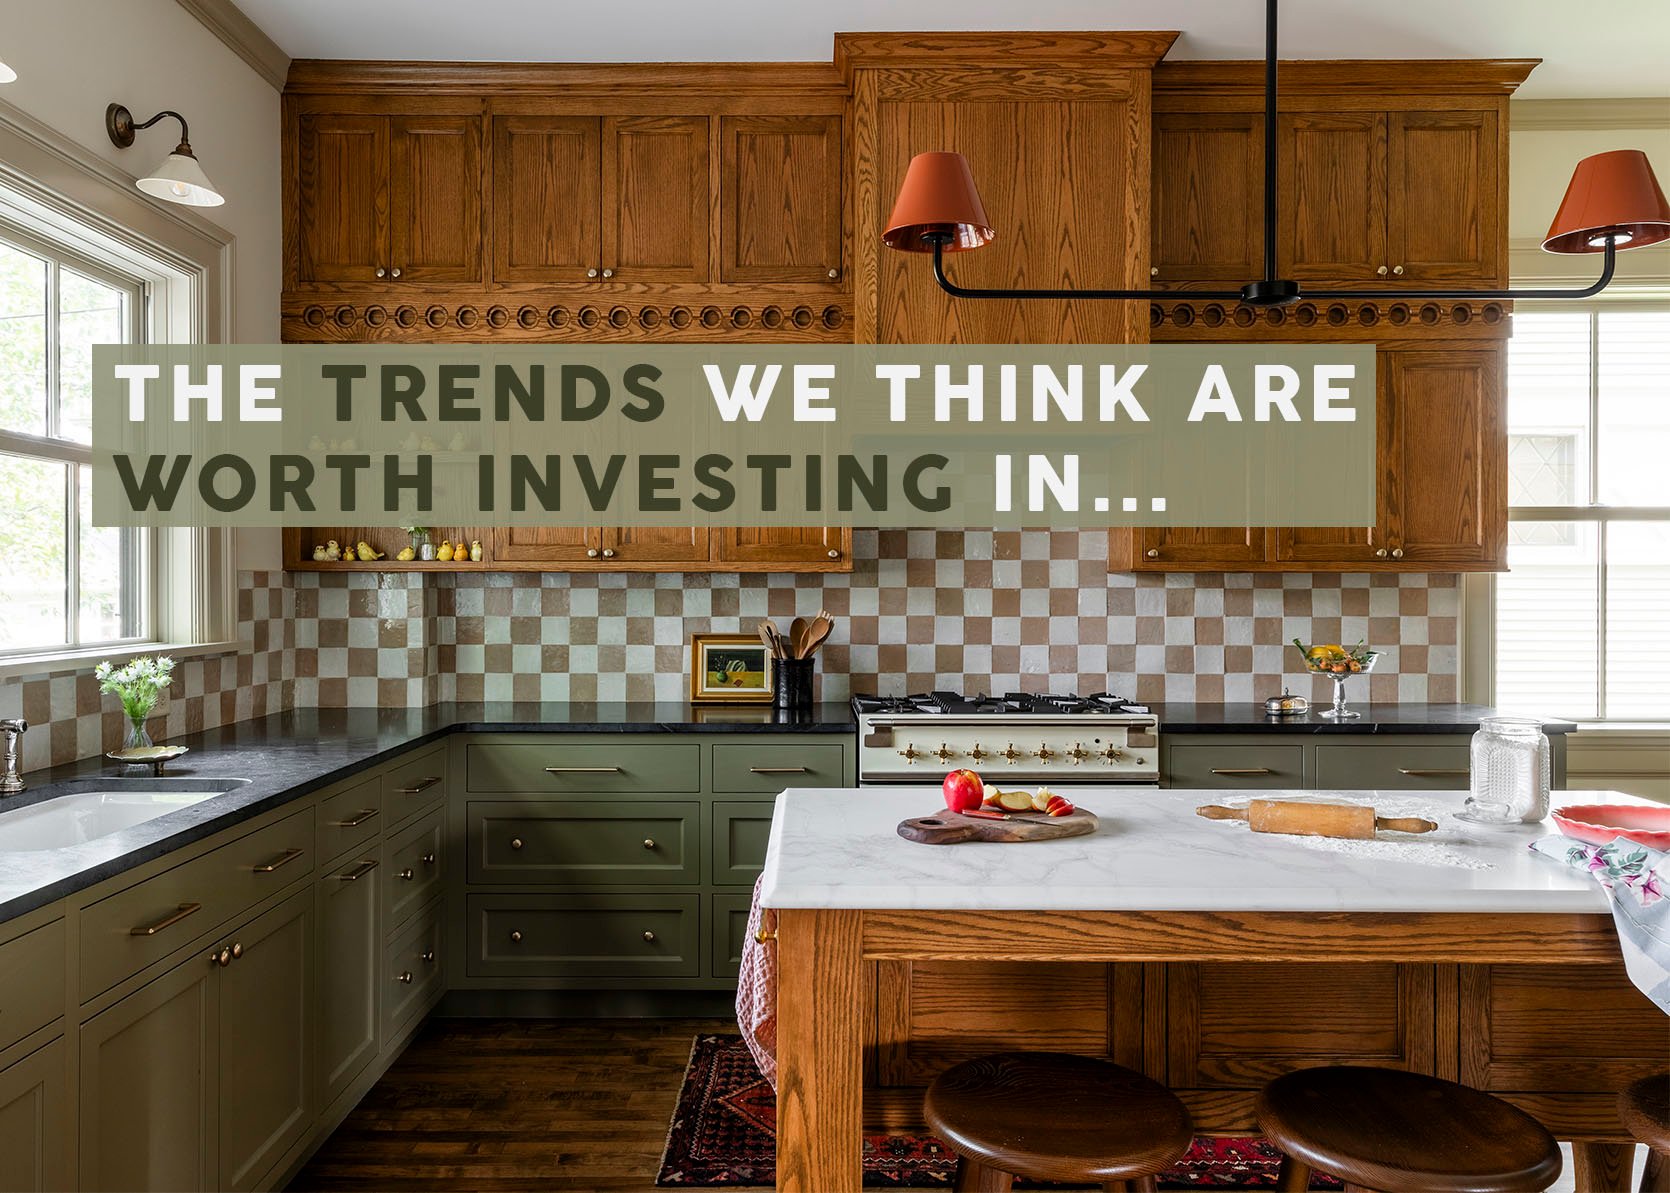 7 Kitchen Trends That Have Real Staying Power (Because They’re That Good)